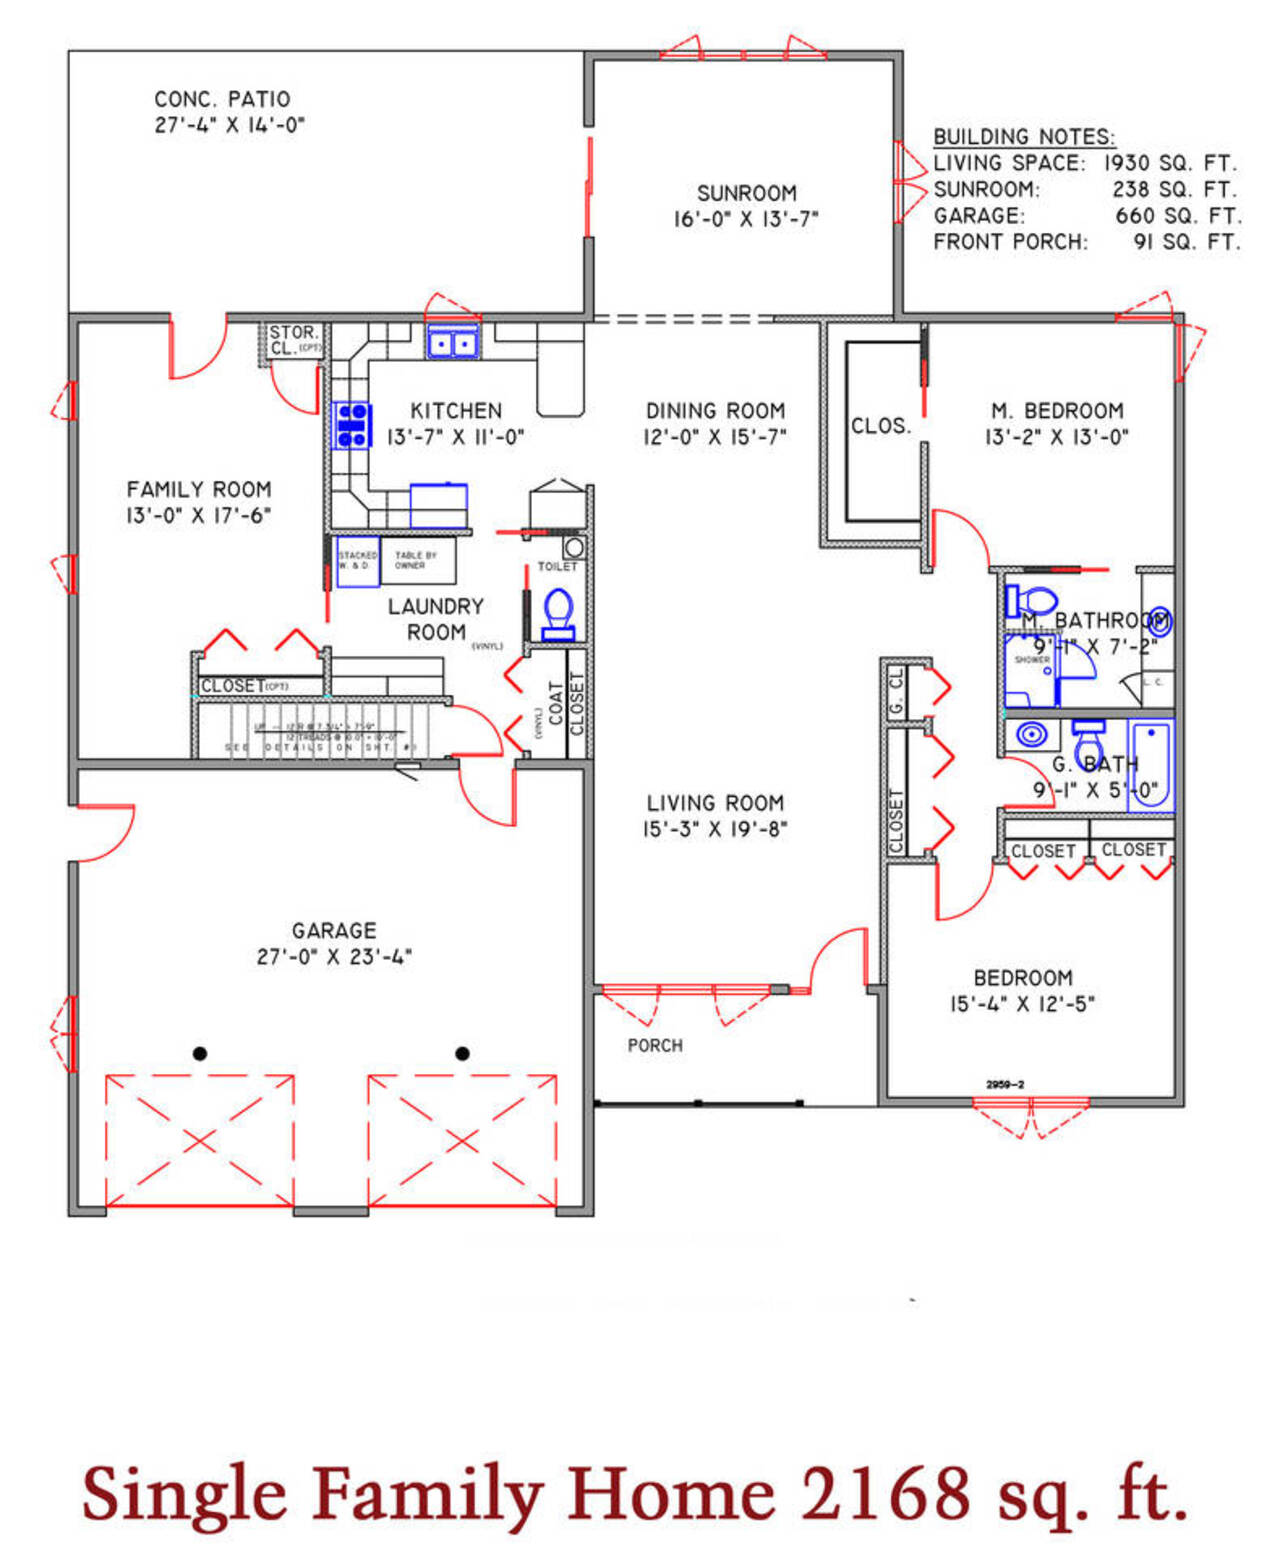 Single Family Homes Floor Plans St. Francis Manor